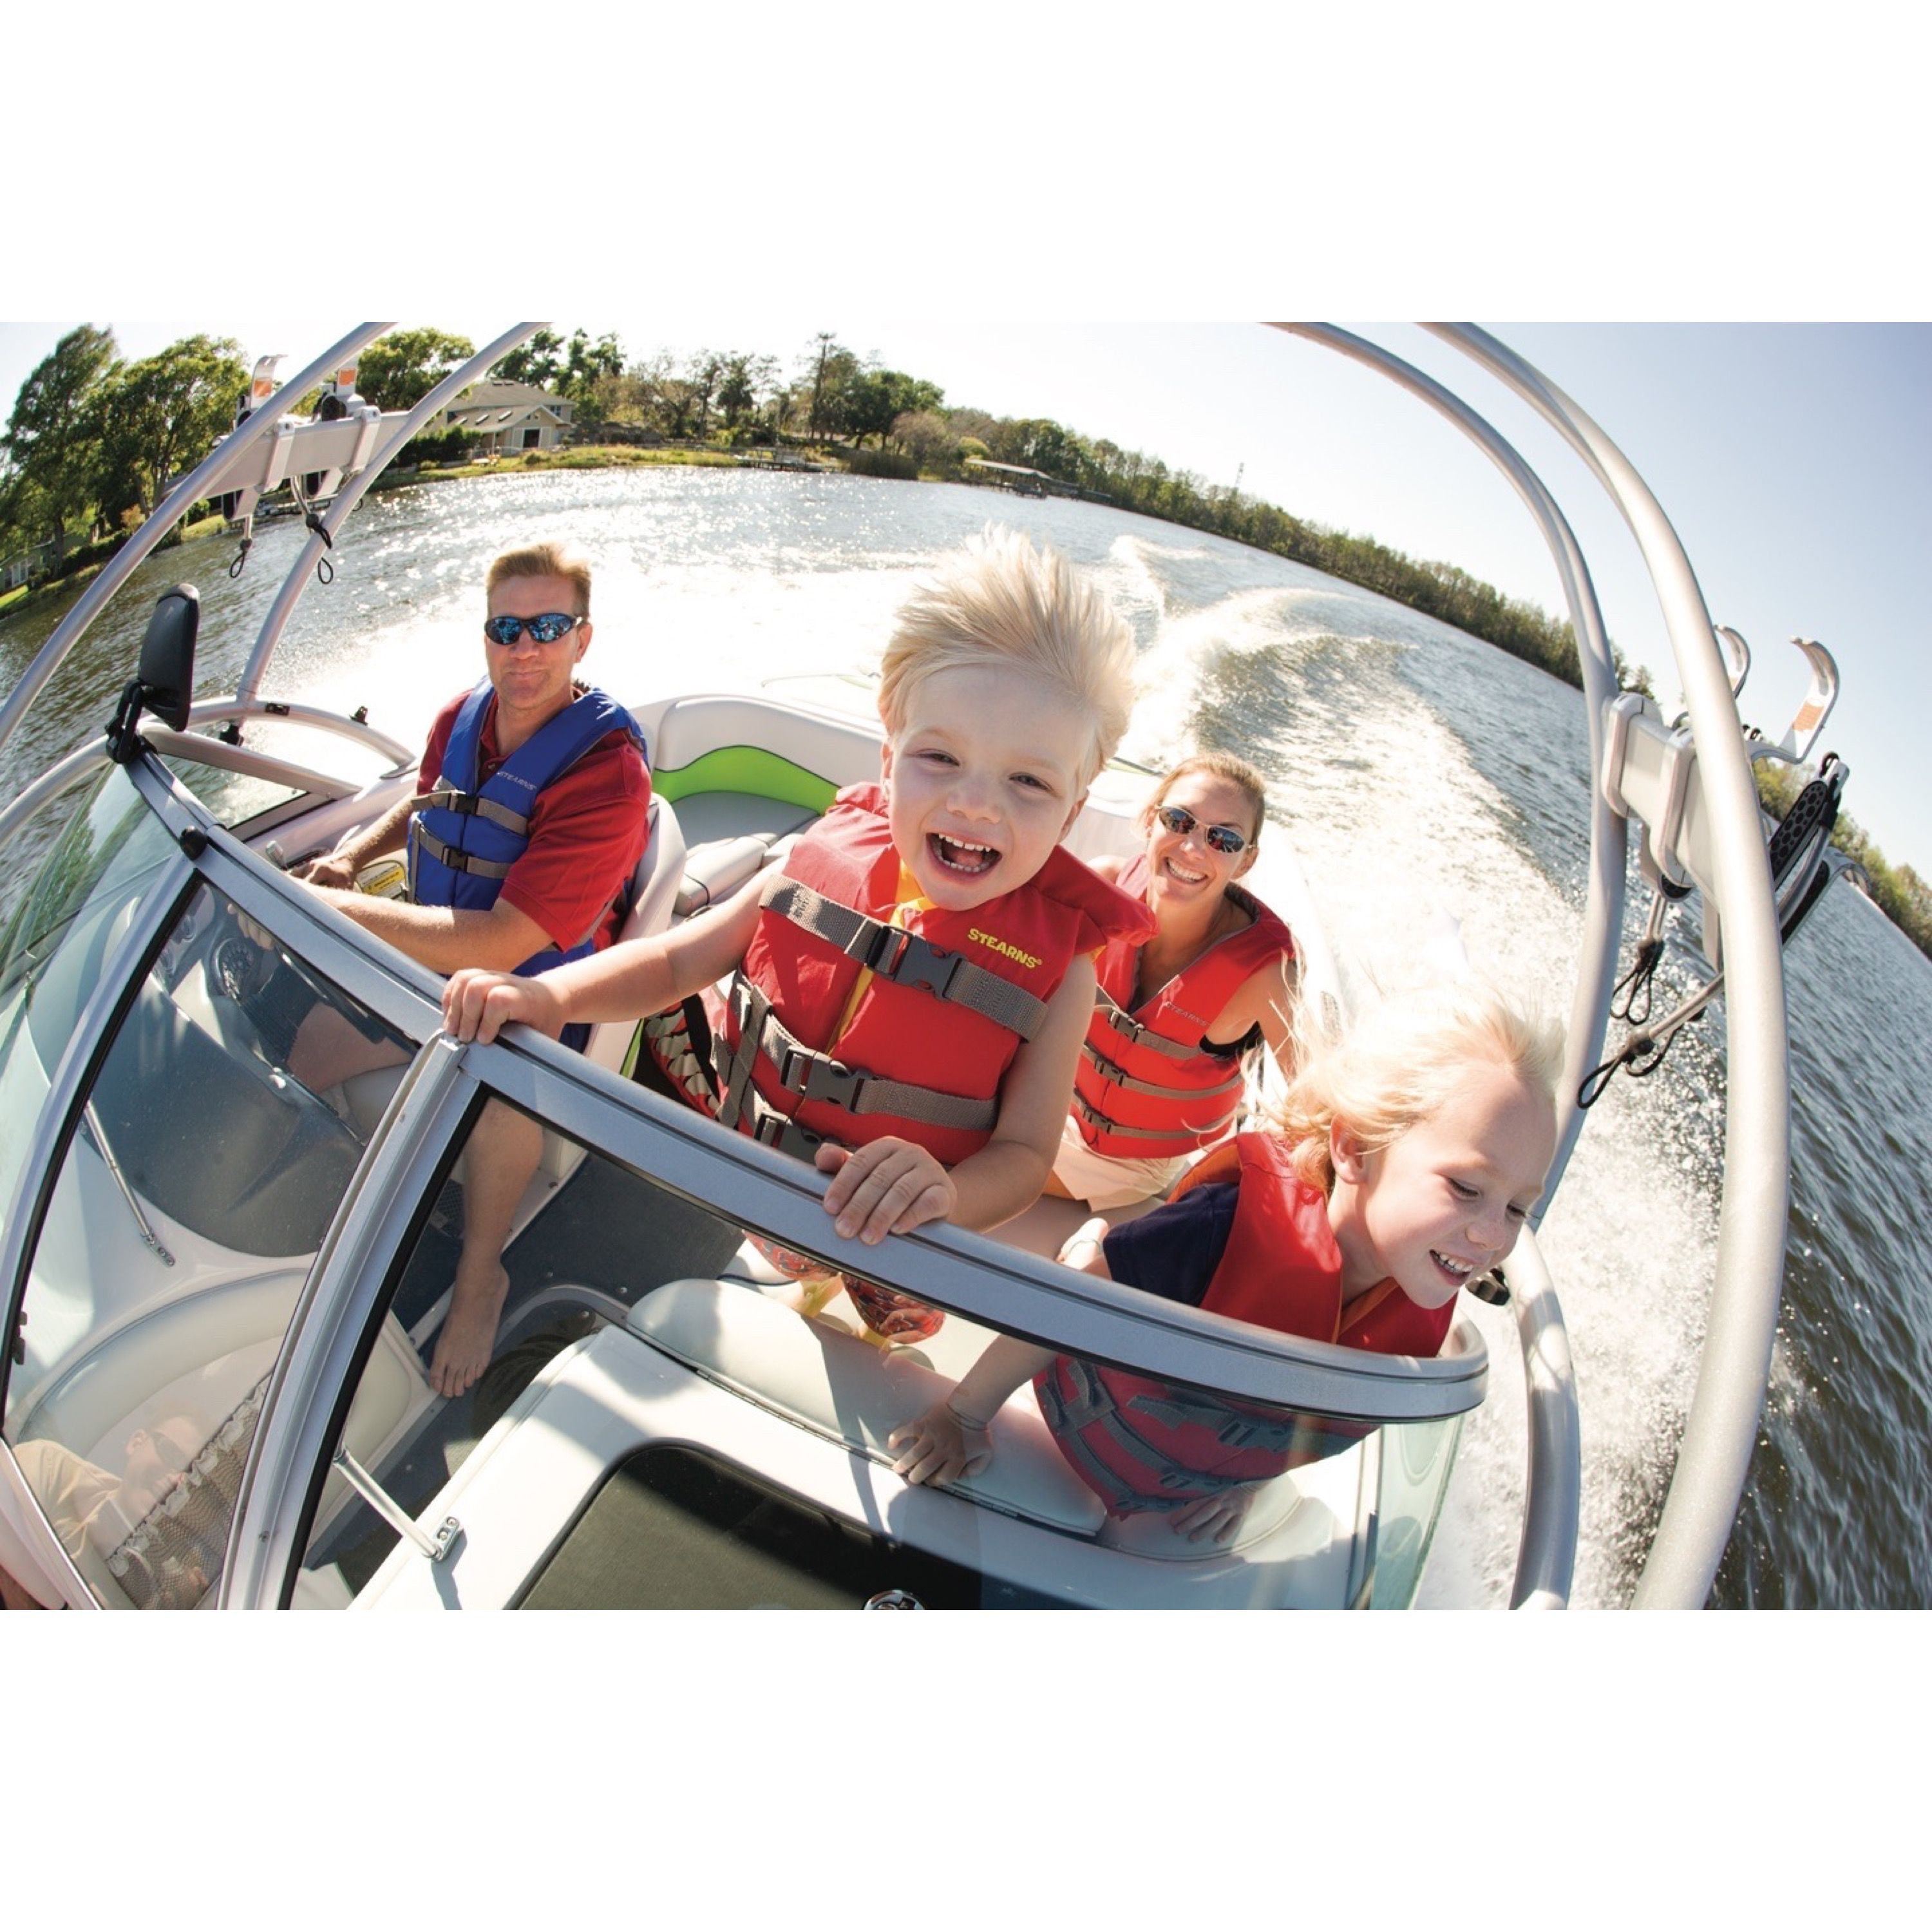 Top 15 Cool Boat Gadgets and Products, The holidays are here! Shop these boat  accessories and gadgets.